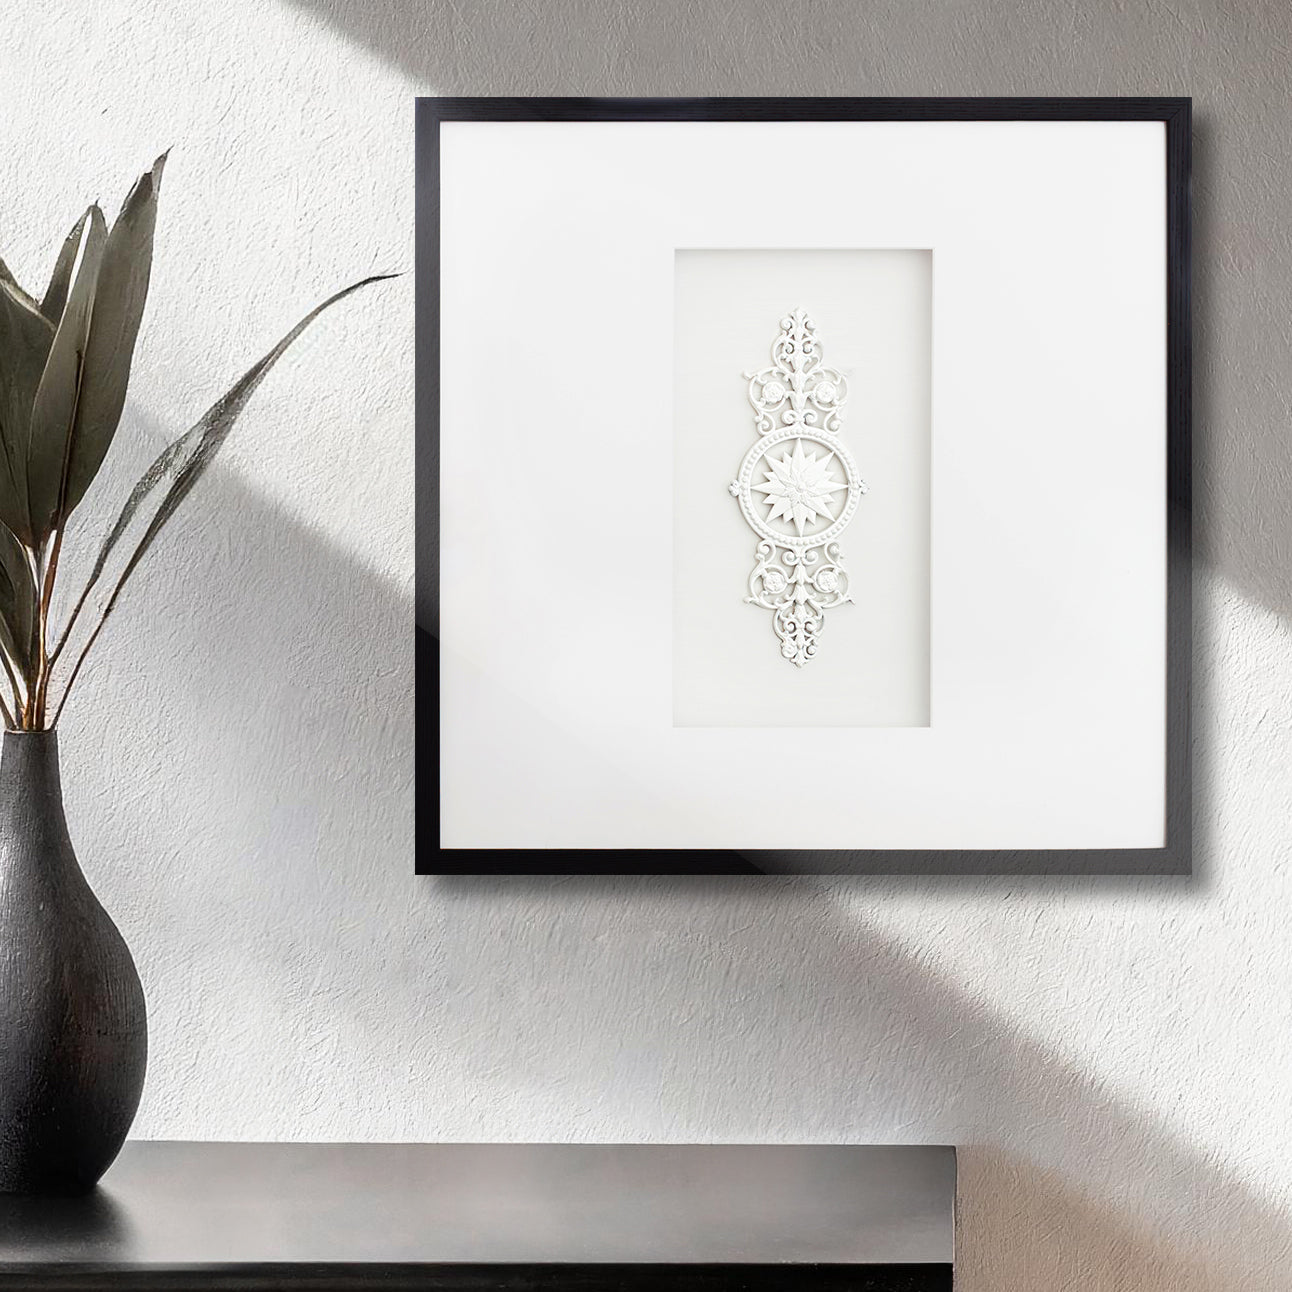 Contemporary framed sunburst rosette artwork on textured wall with vase and plant.